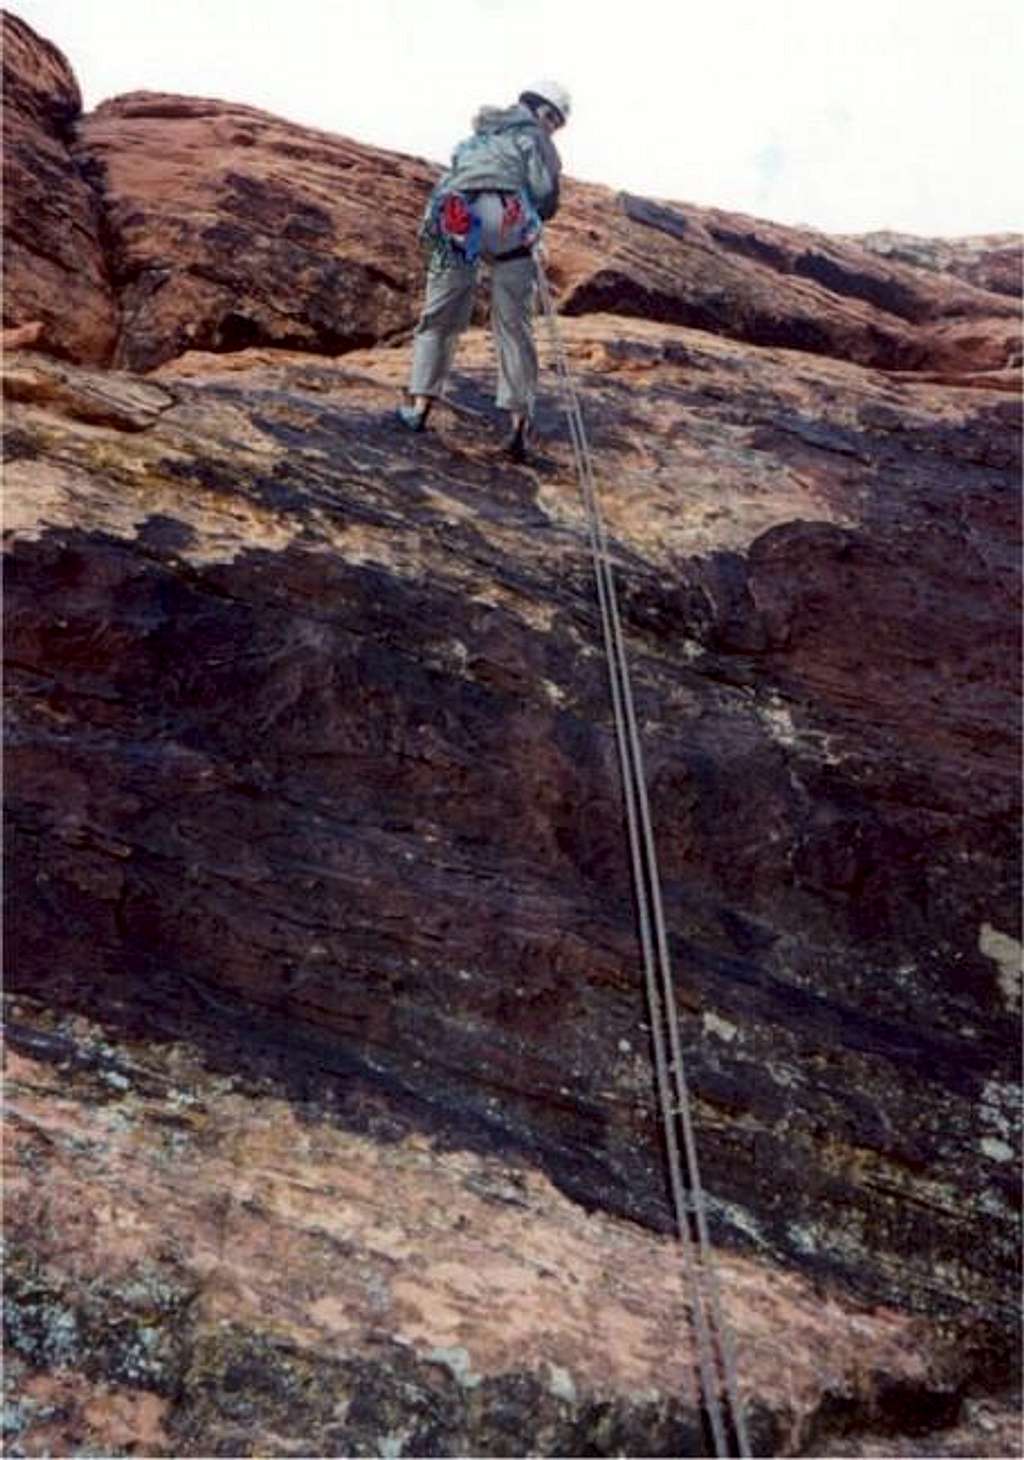 The single (one rope) rappel...